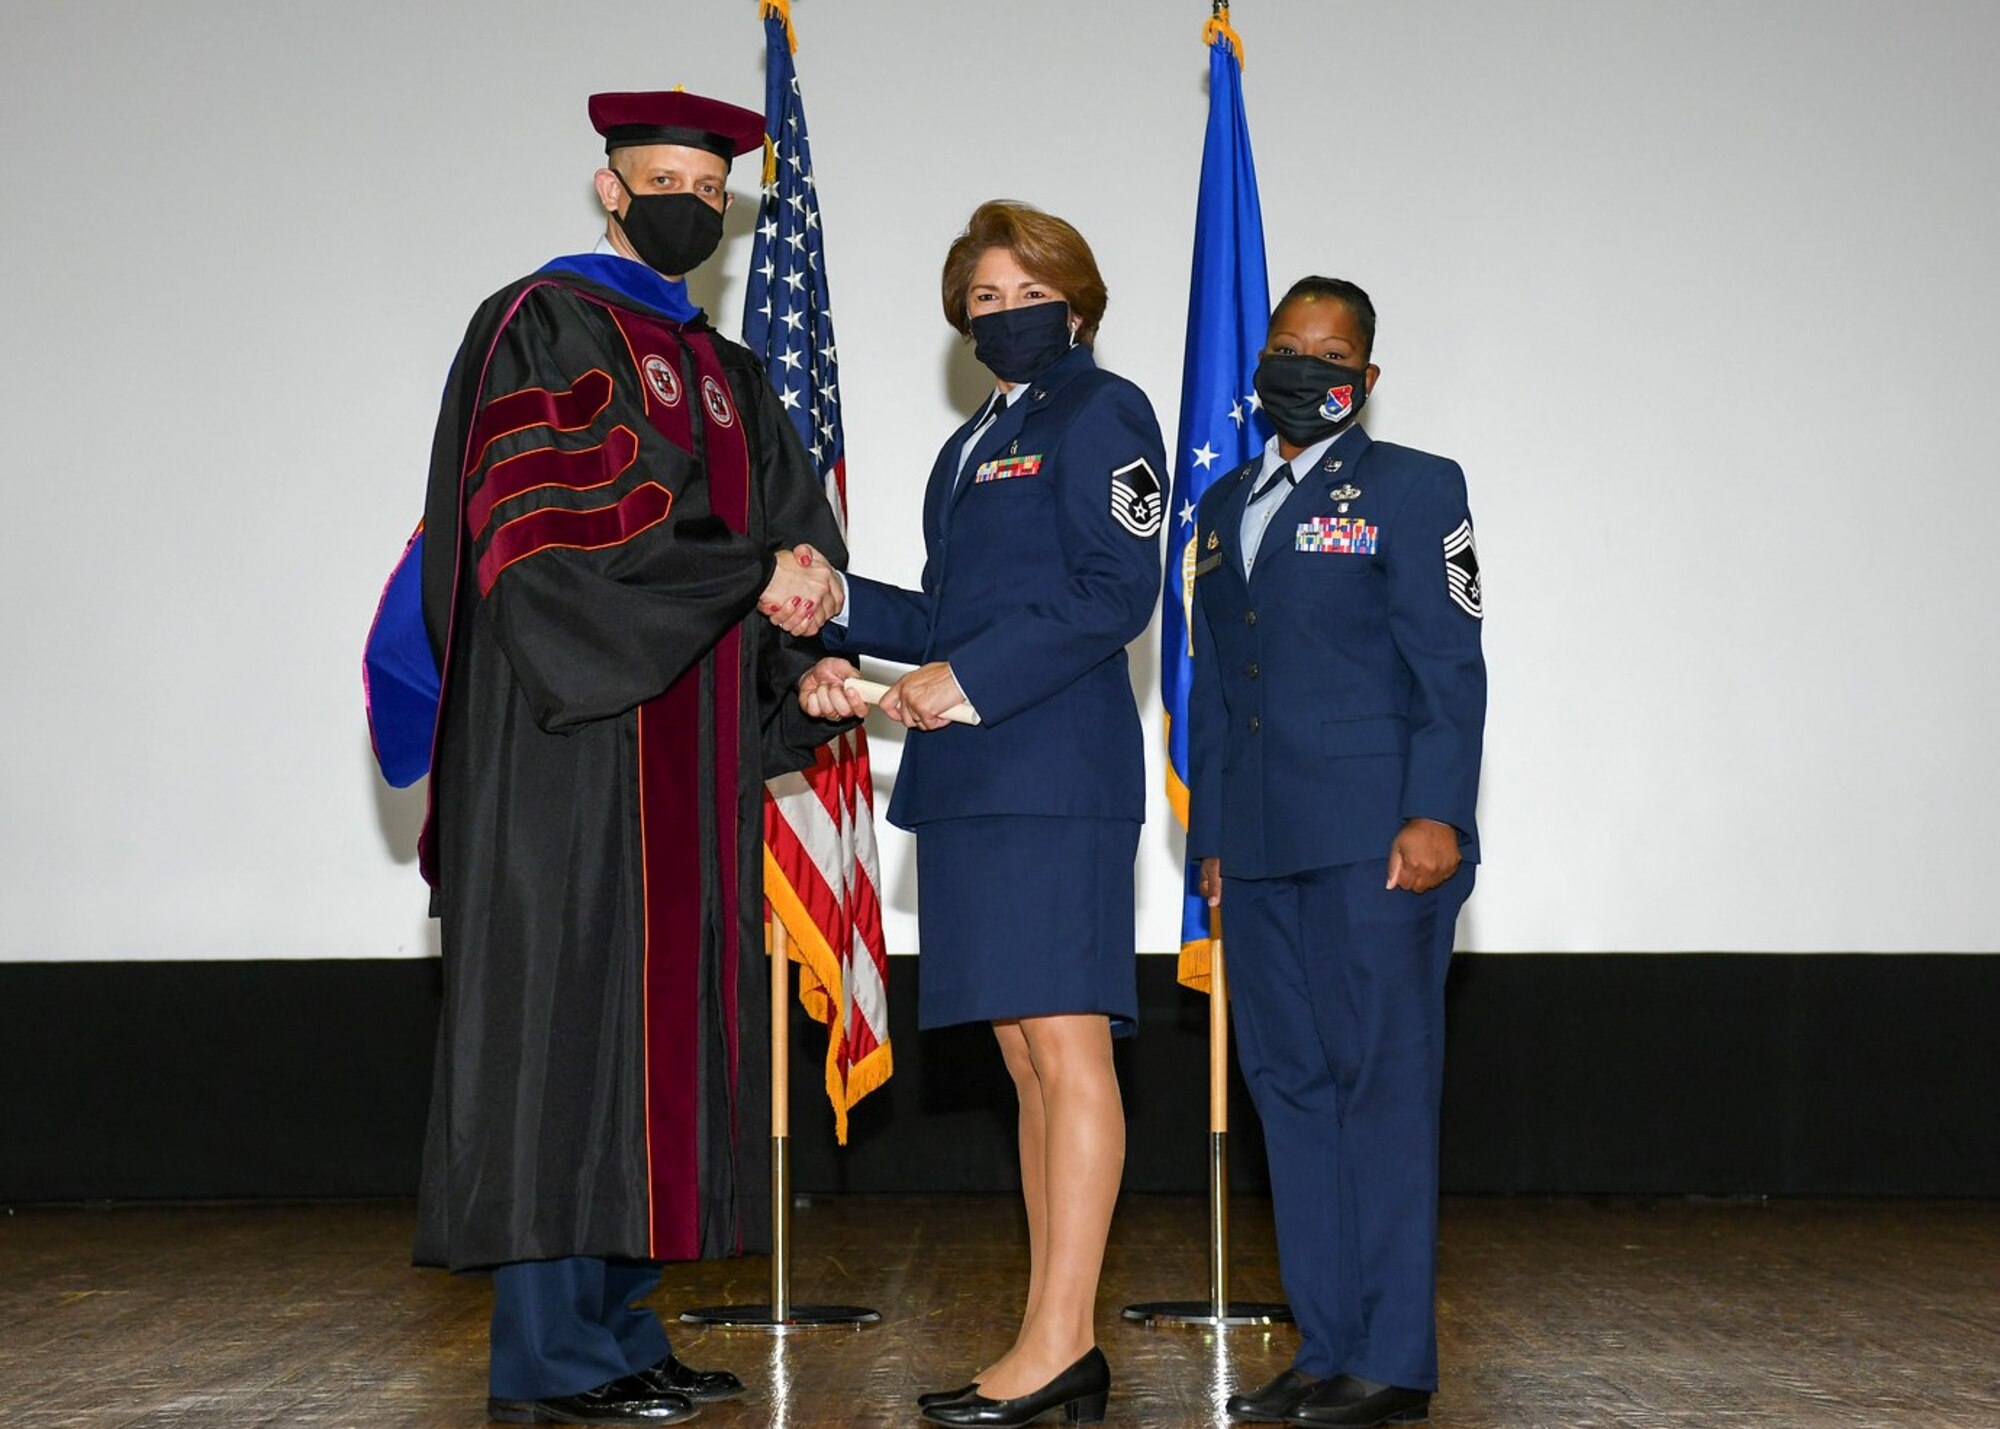 459th ARW NCOs graduate from CCAF
Master Sgt. Maria Clark of the 459th Aerospace Medicine  graduated from the Community College of the Air Force during its ceremony held at the Joint Base Andrews theater on Oct. 21, 2021.